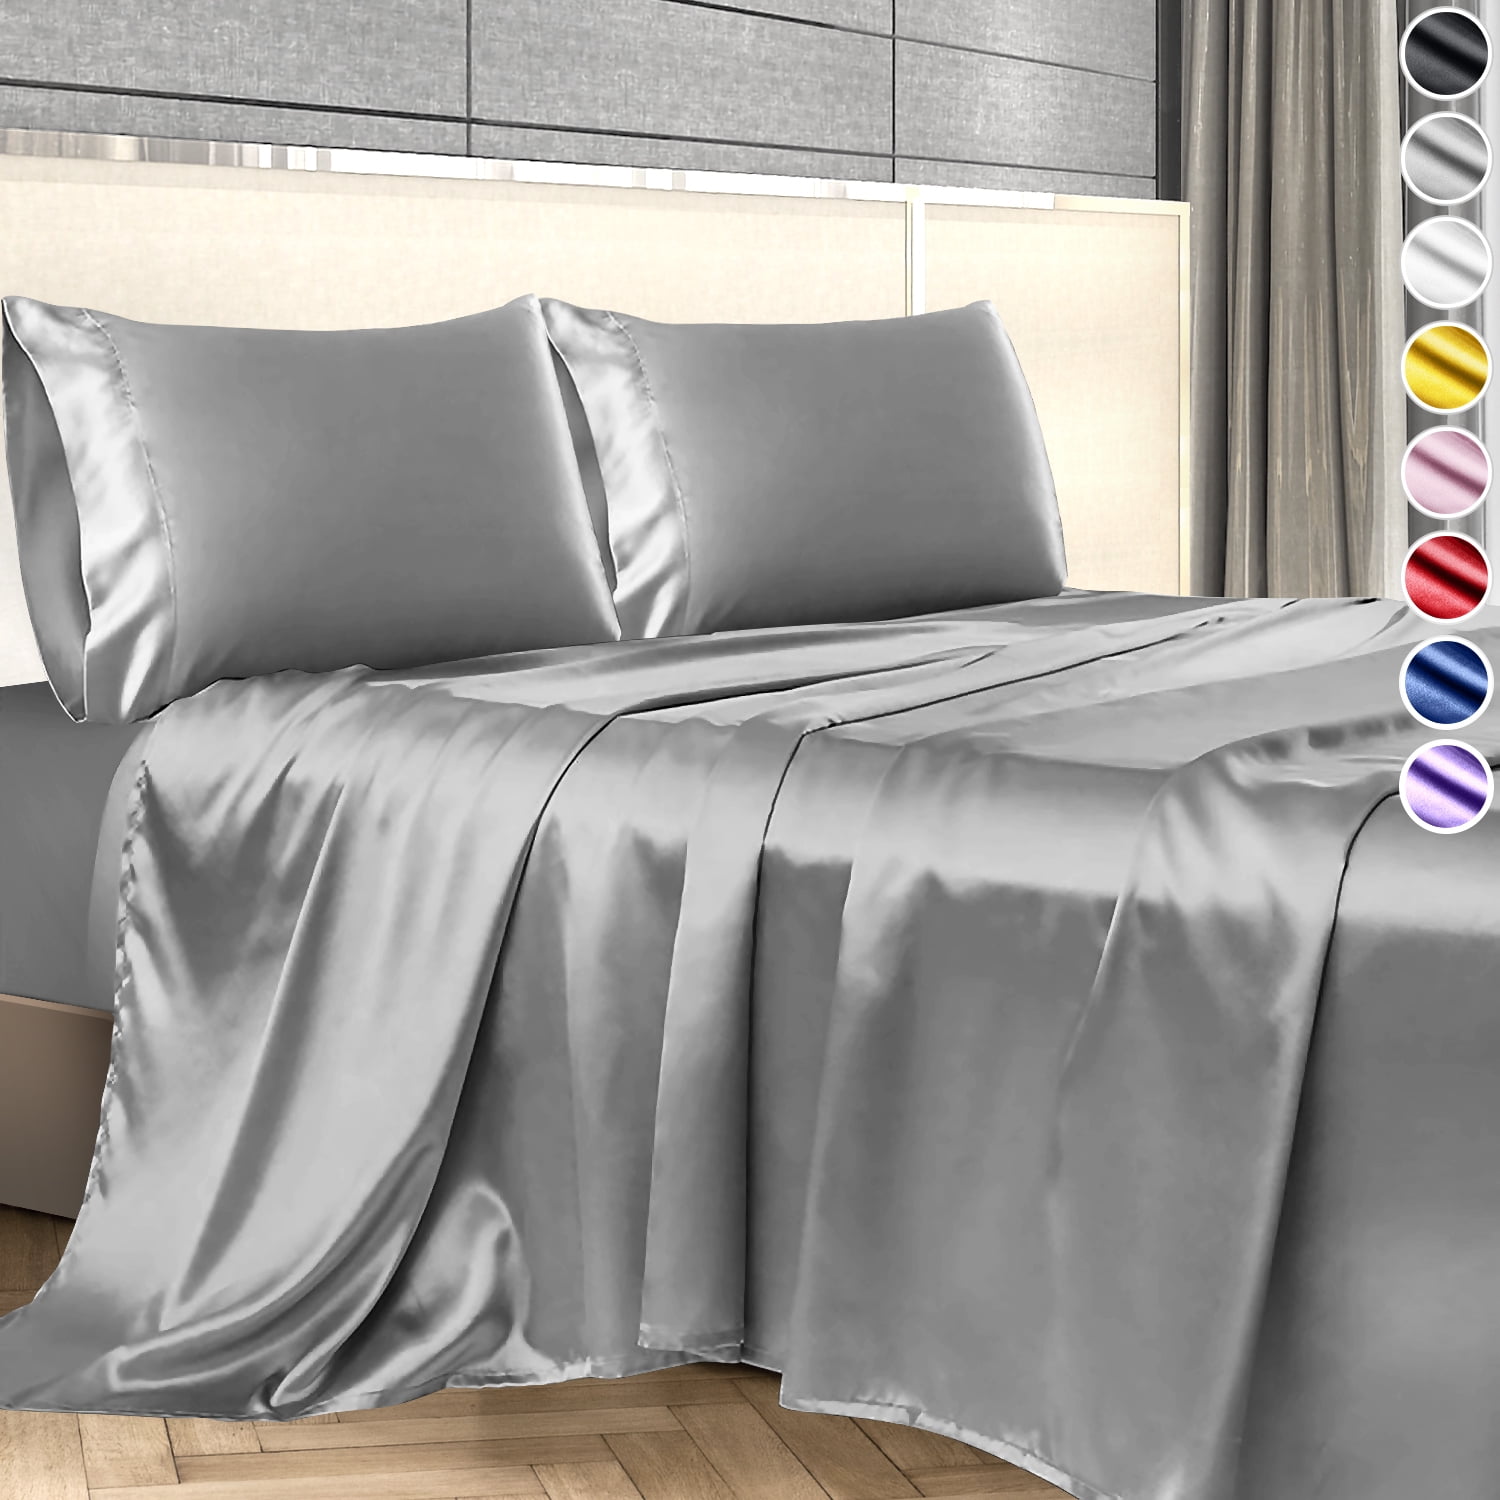 4-PC Gray Bridal Satin Silky Sheet Set Queen/King Size Flat Fitted Pillows 